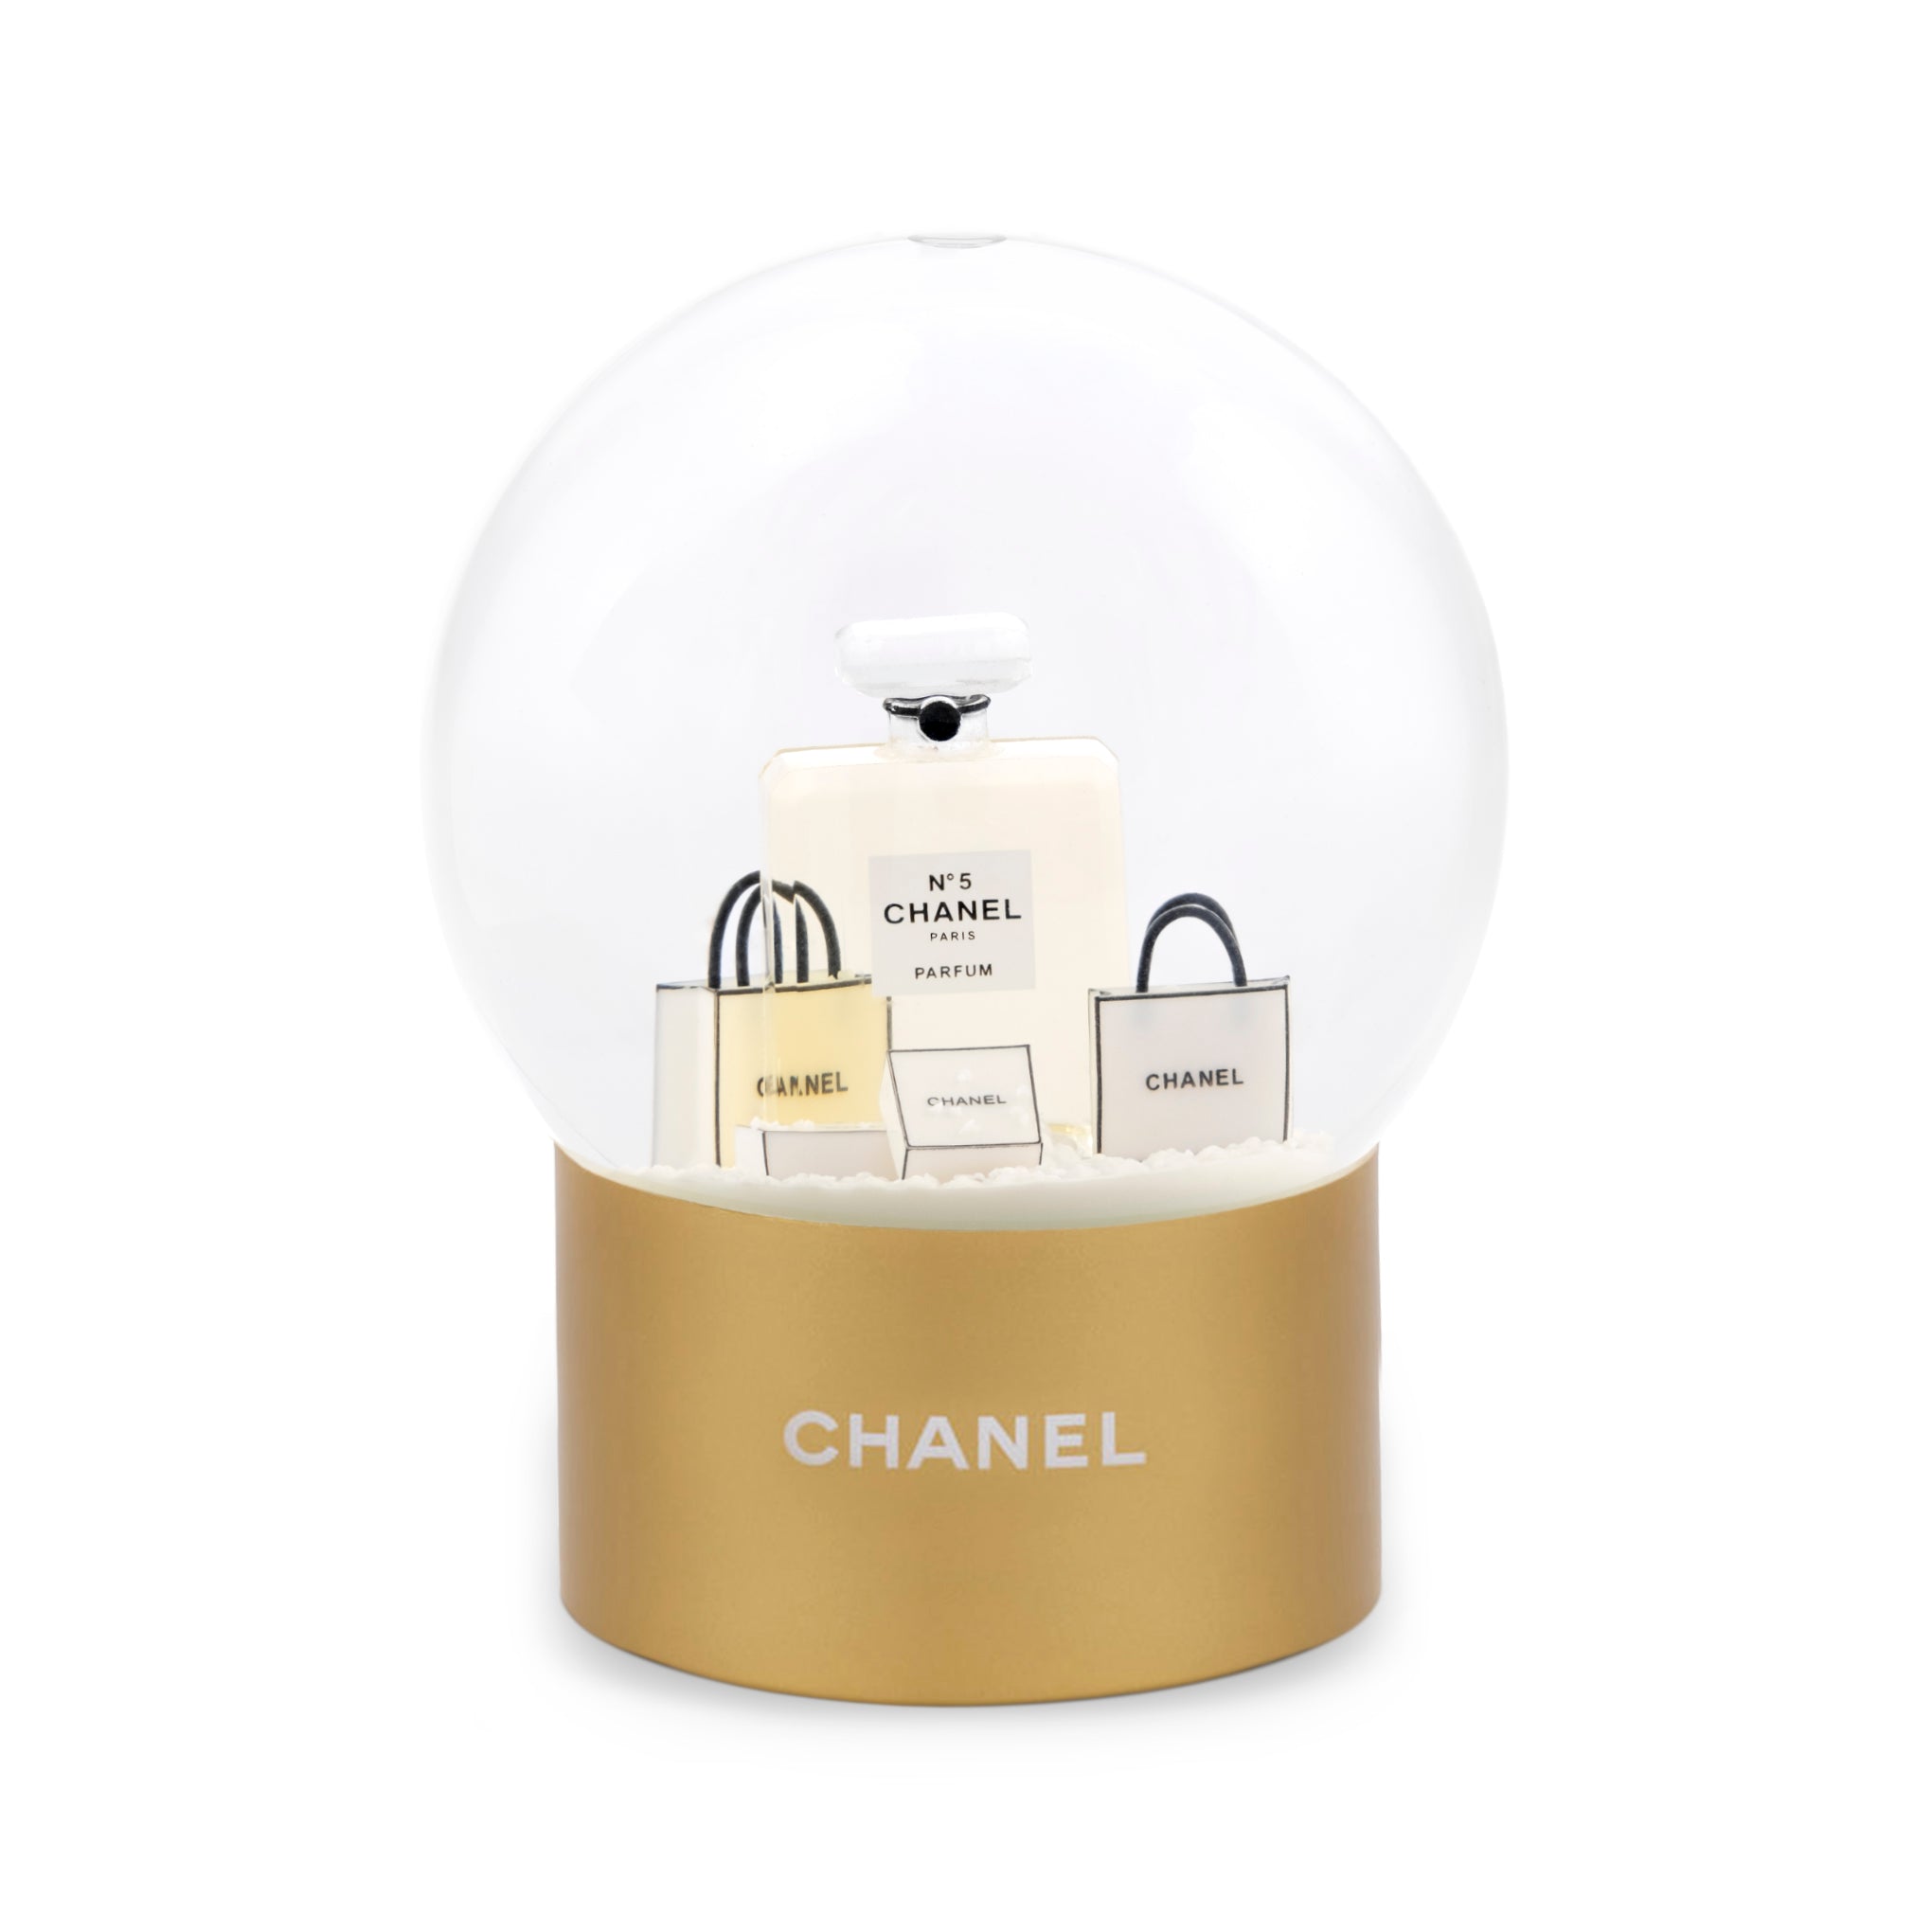 Chanel, Number 5 Perfume and Shopping Bag Red Snow Globe